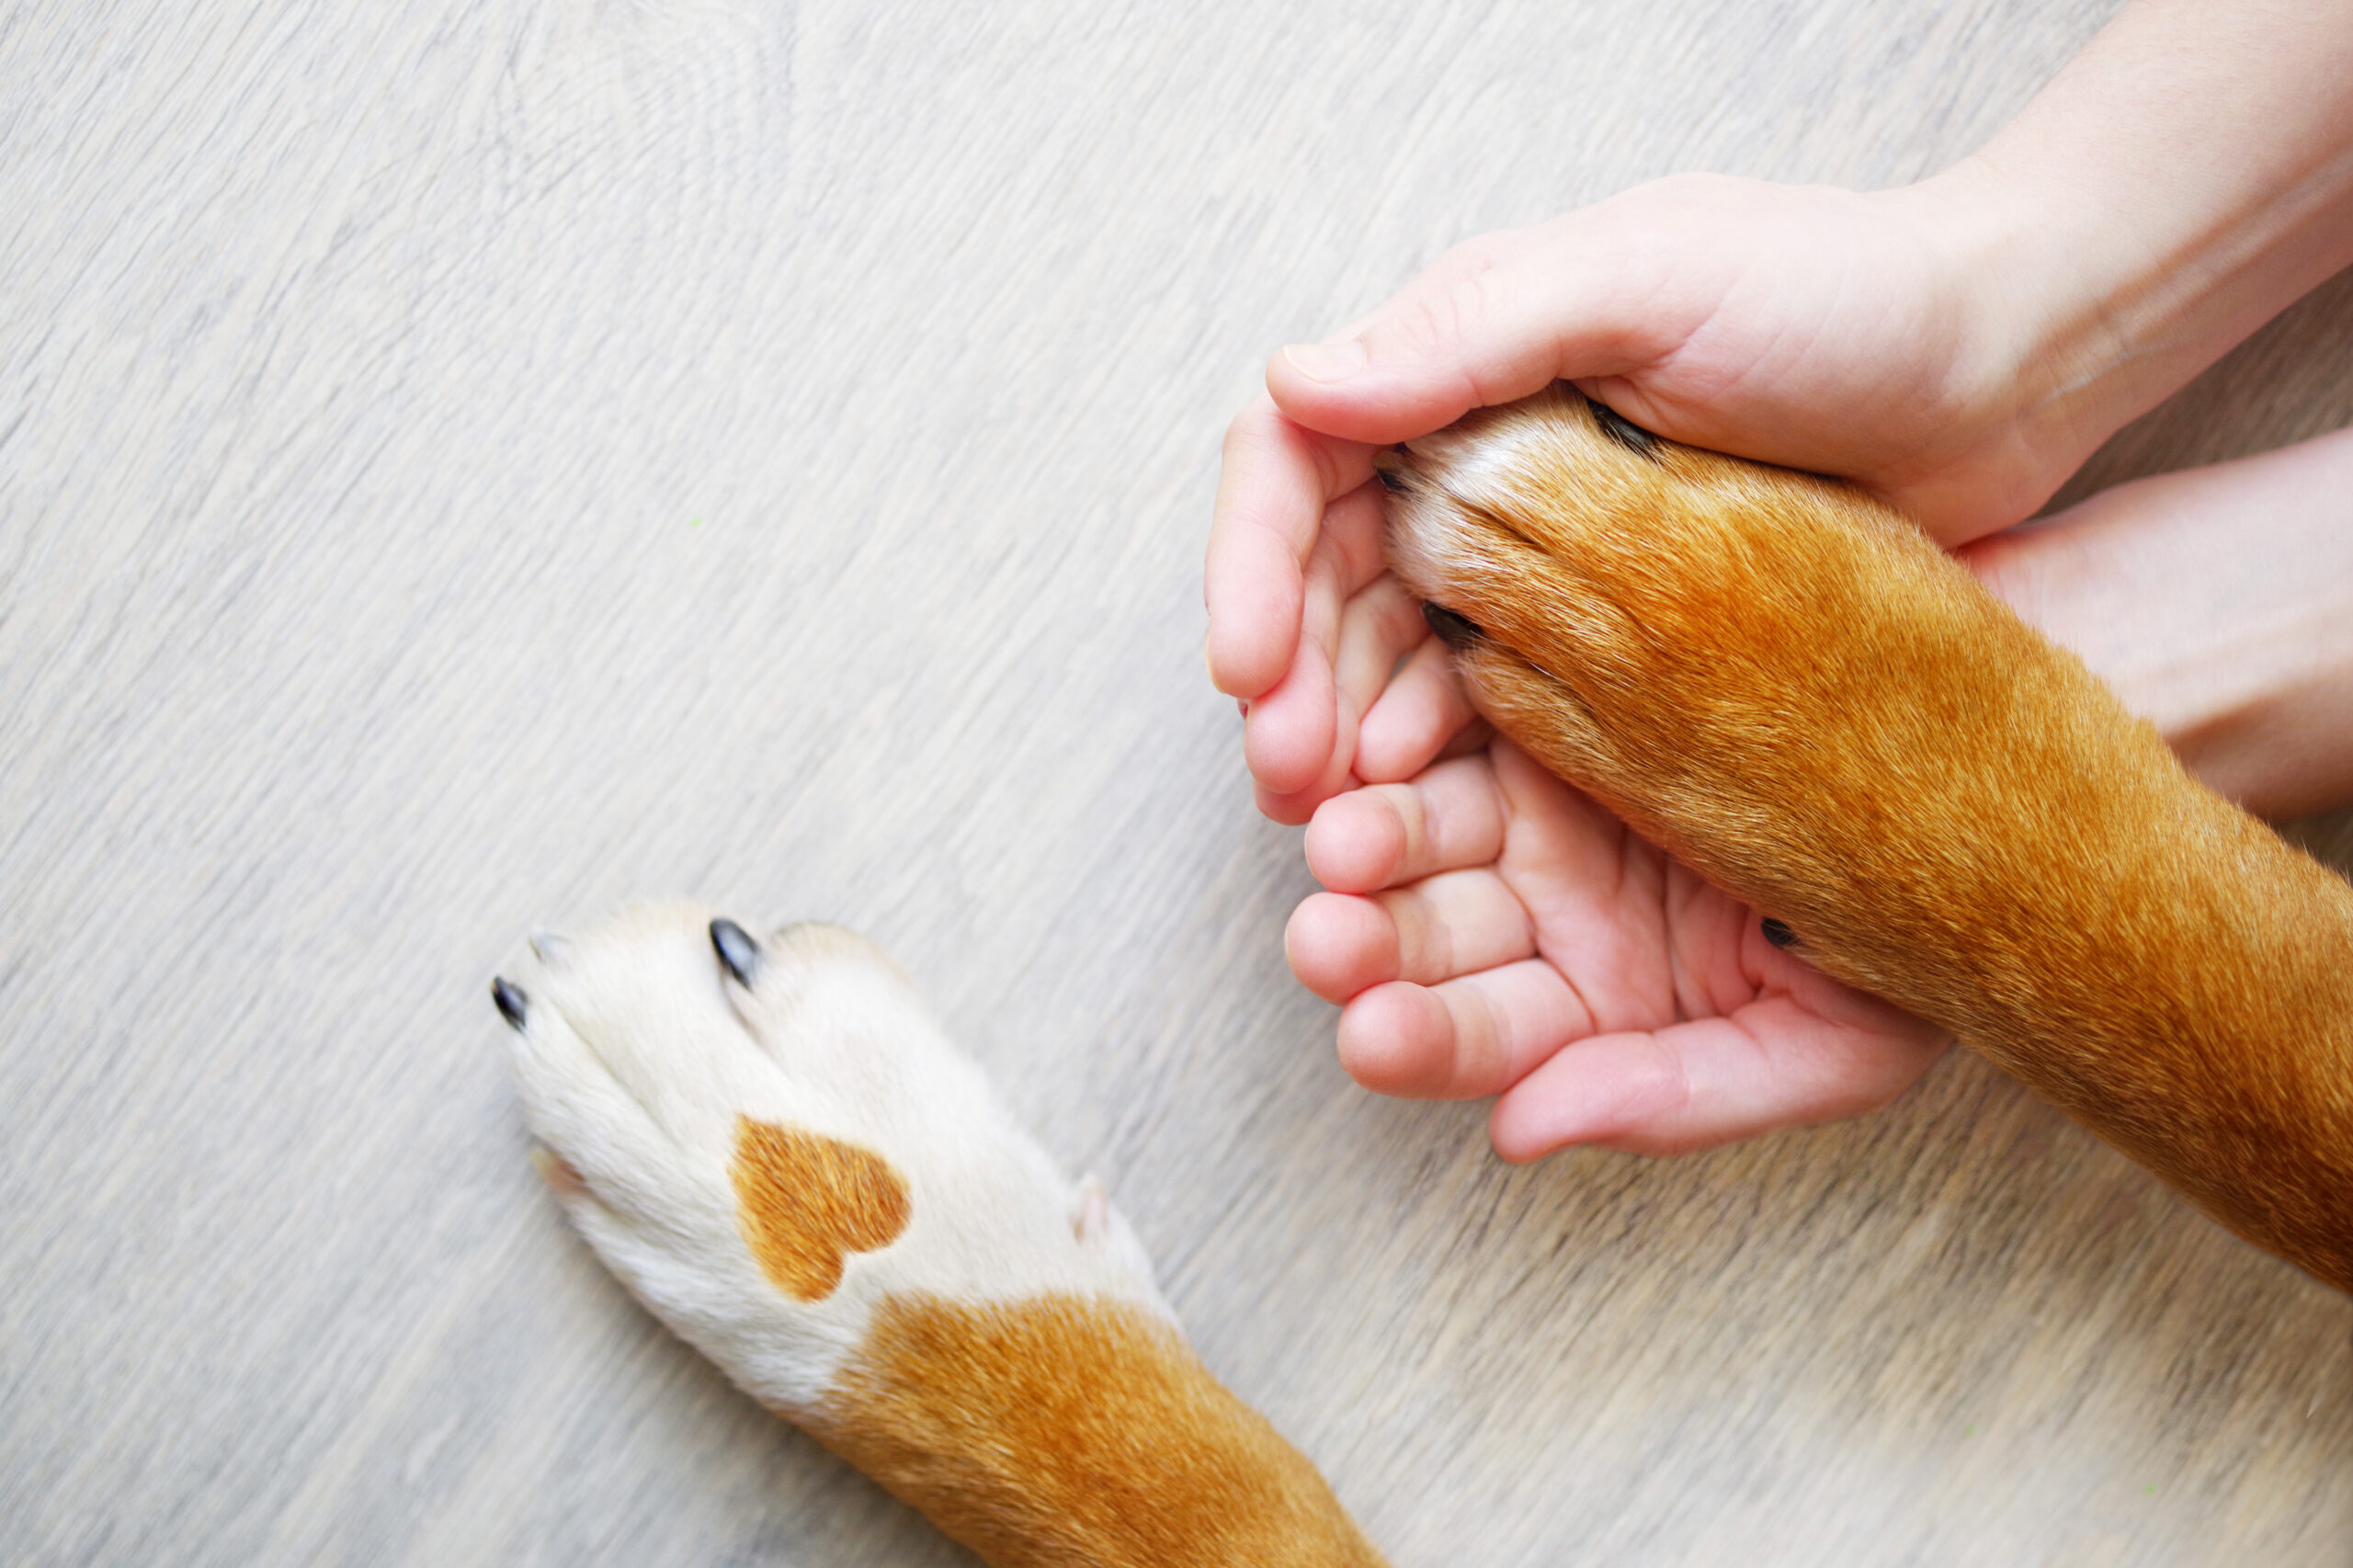 Dog paws with a spot in the form of heart and person's hands holding one of the paws.